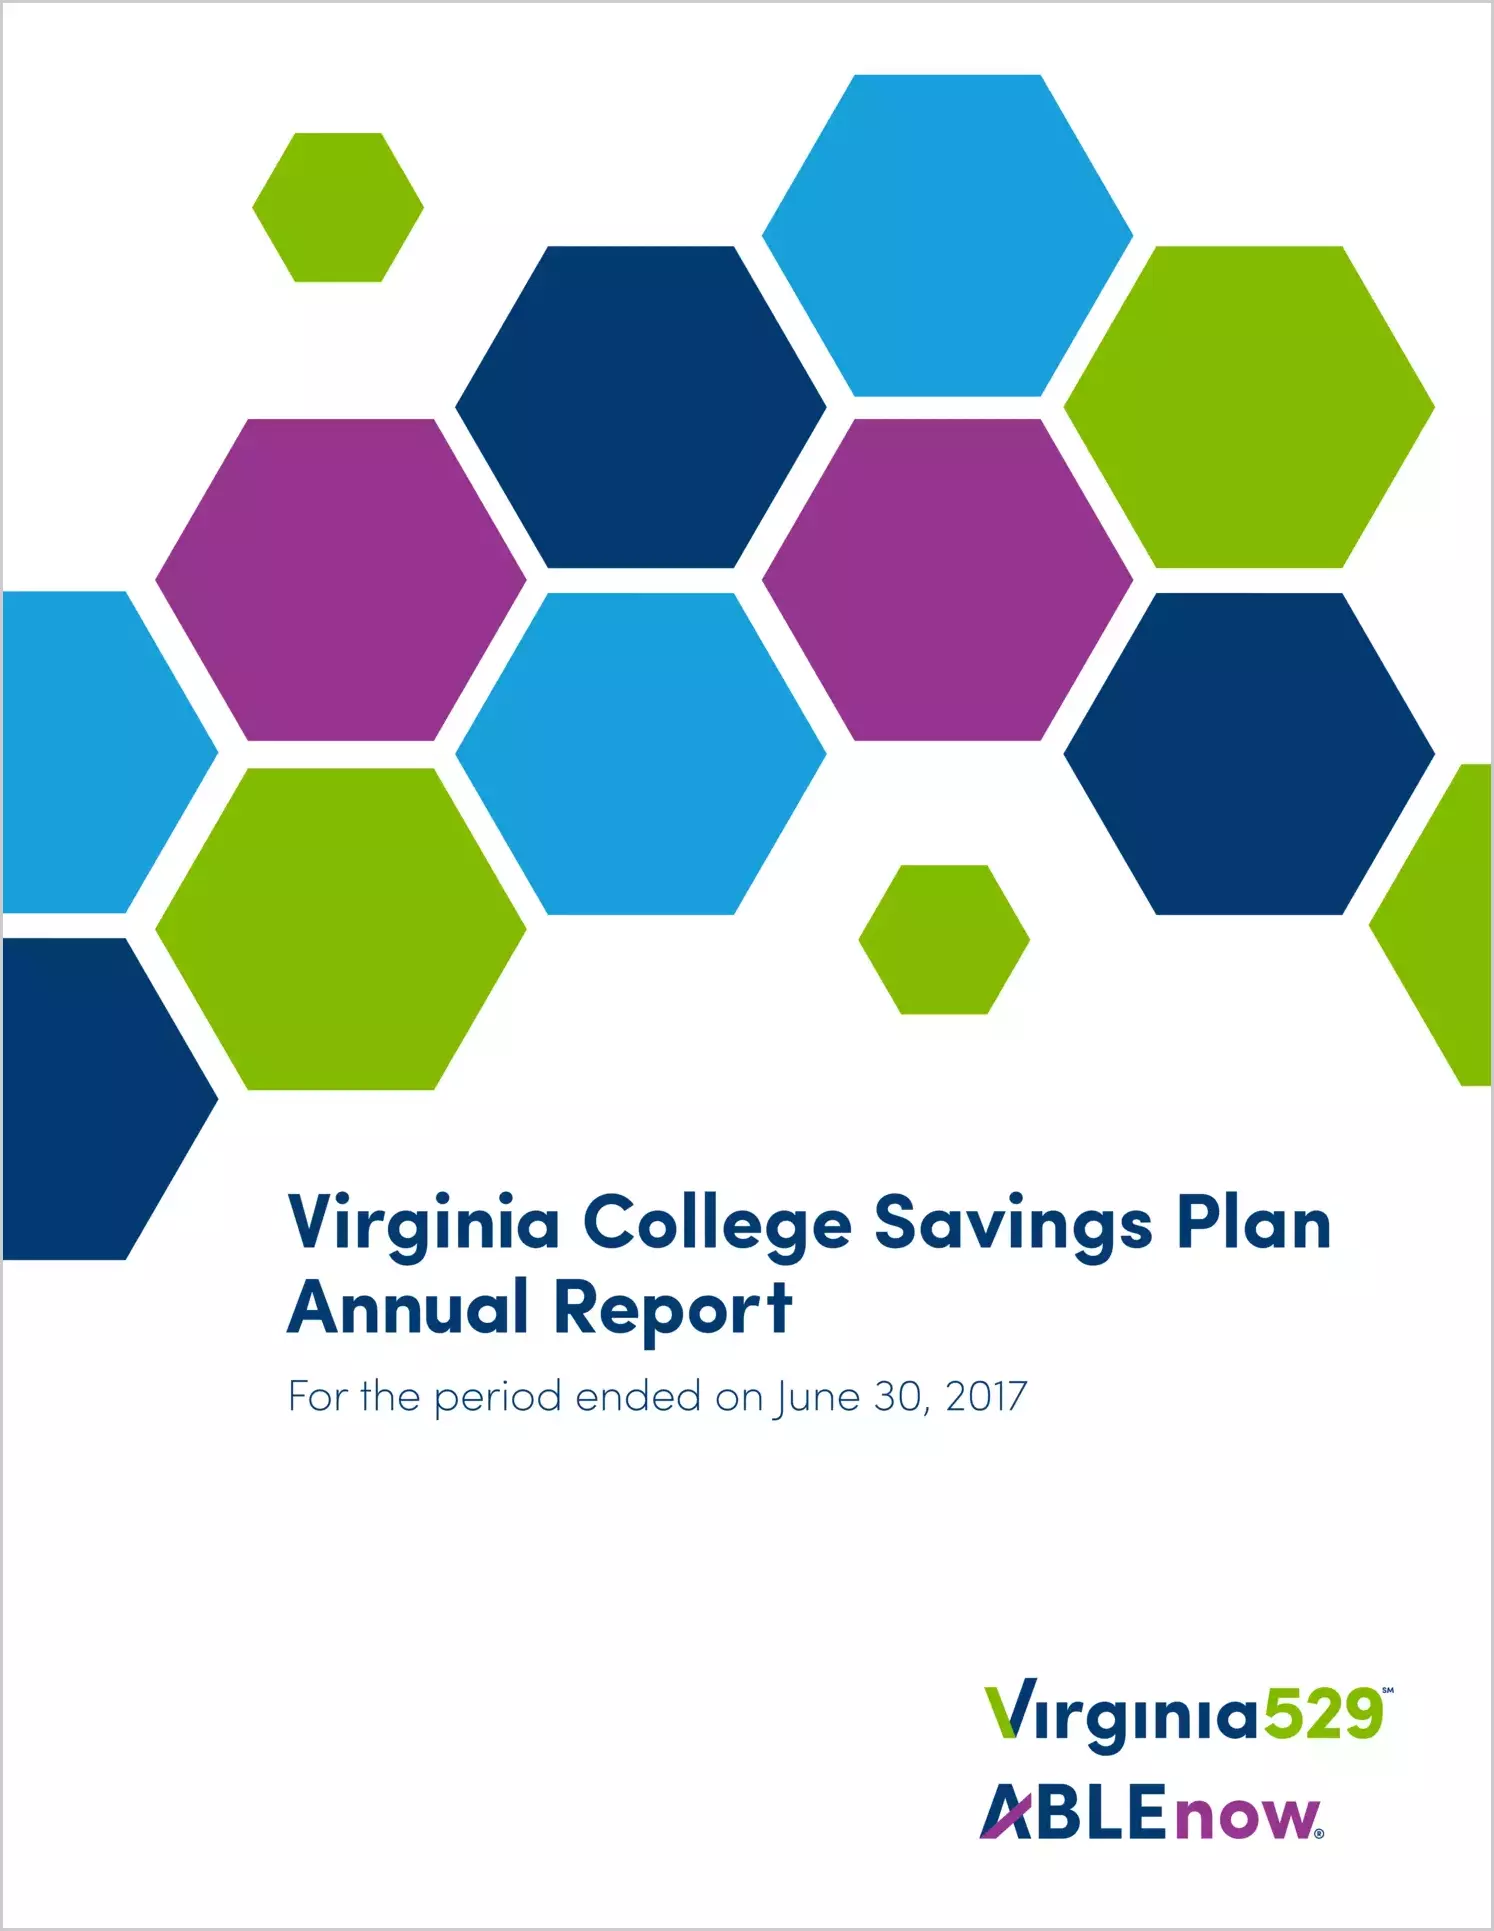 Virginia College Savings Plan Financial Statements for the year ended June 30, 2017